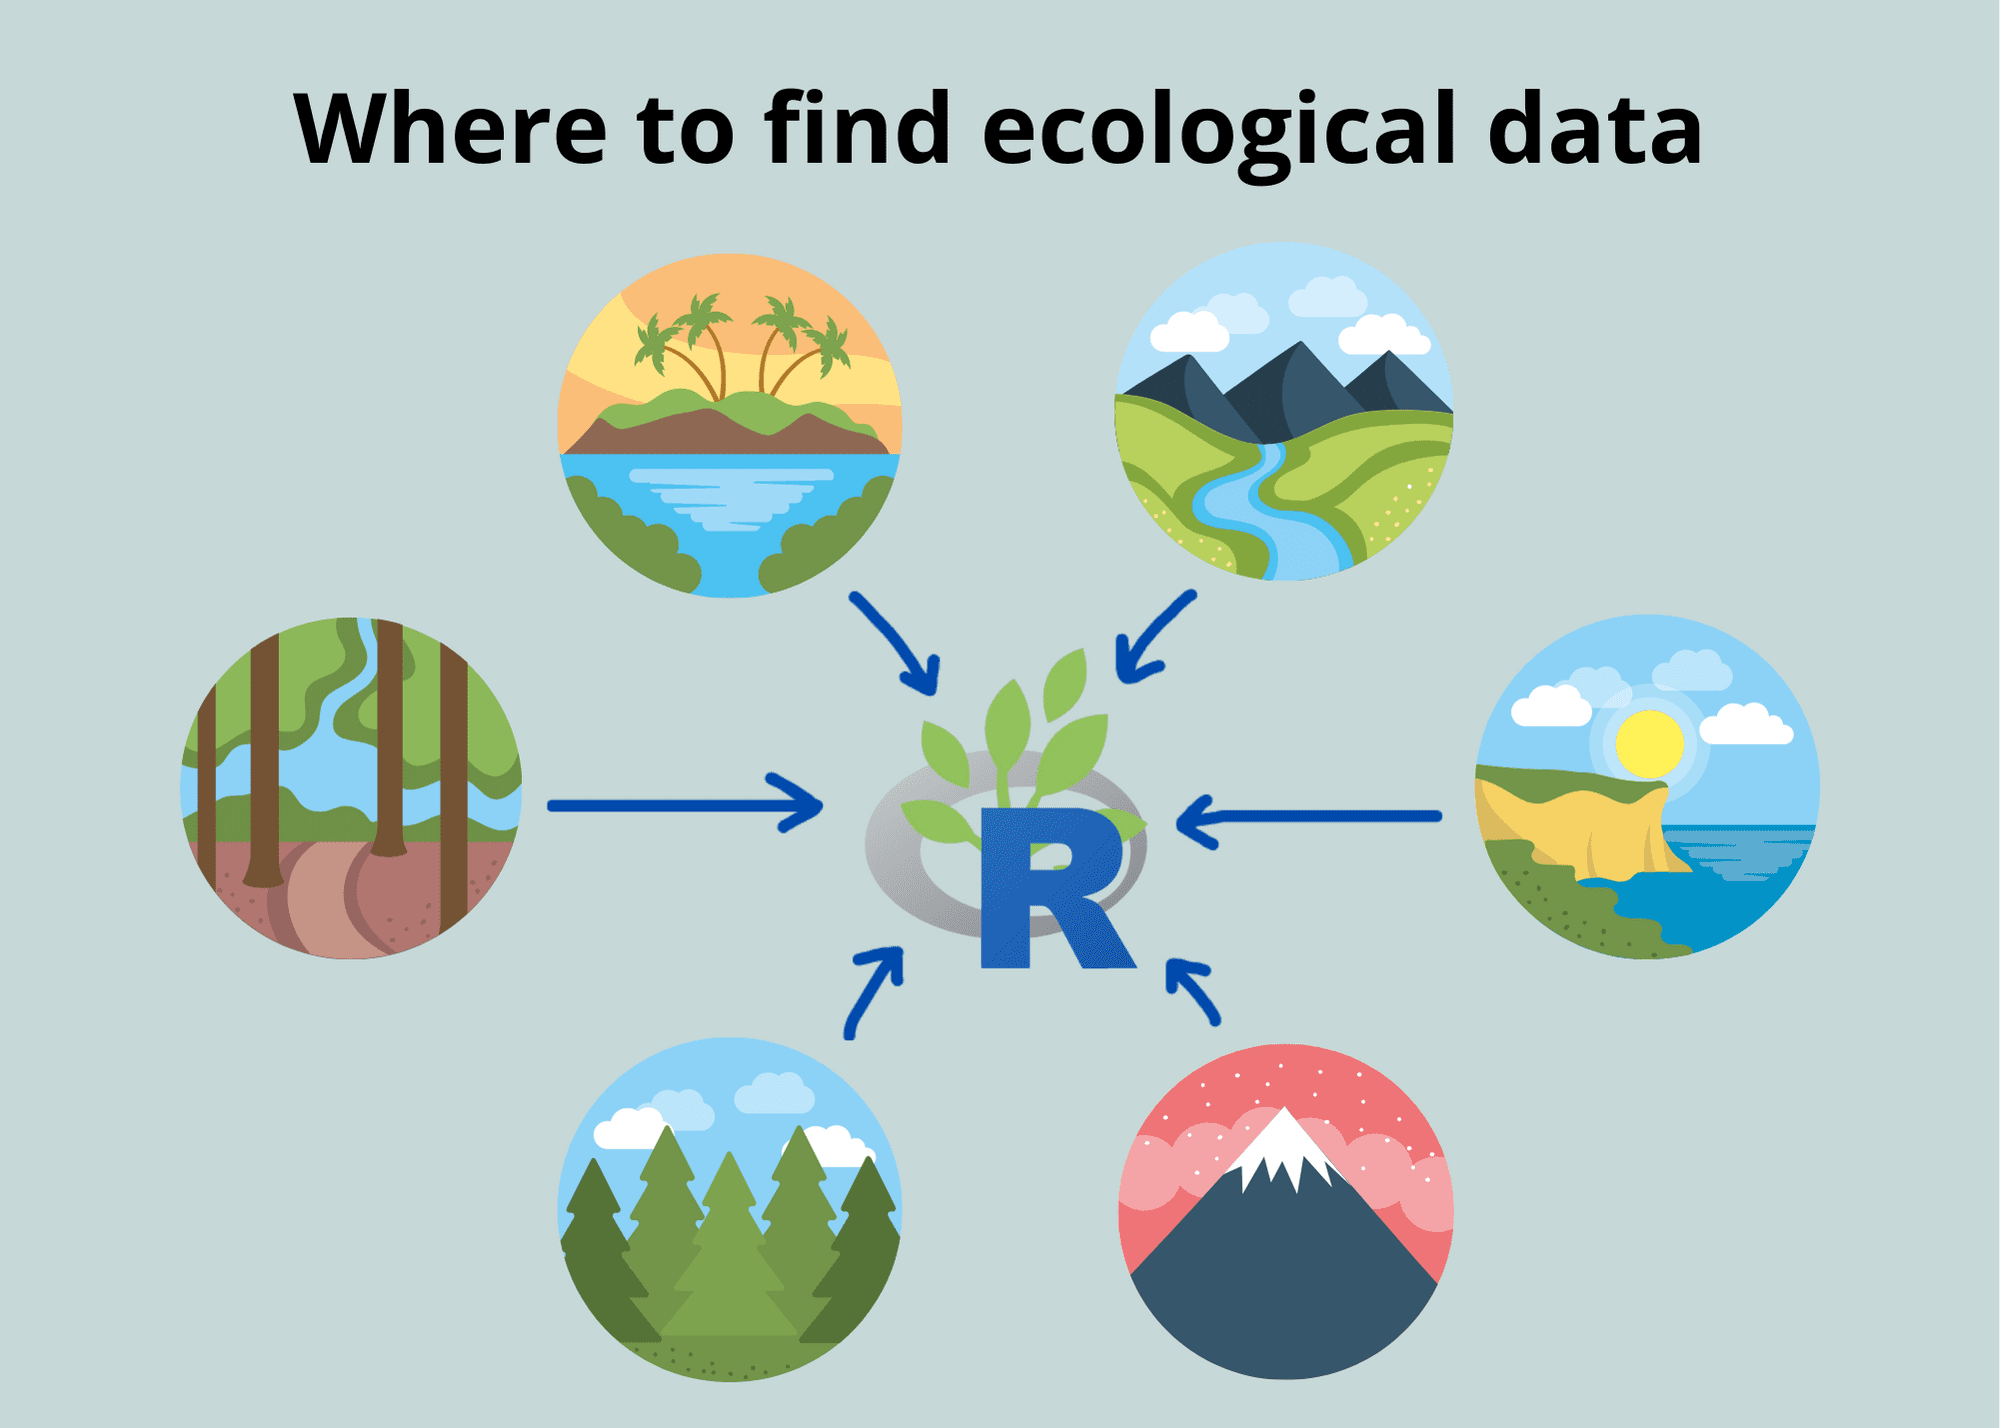 Image of several icons showing different habitats on Earth. These icons are surrounding and pointing to the R for Ecology logo. The image says 'Where to find ecological data'